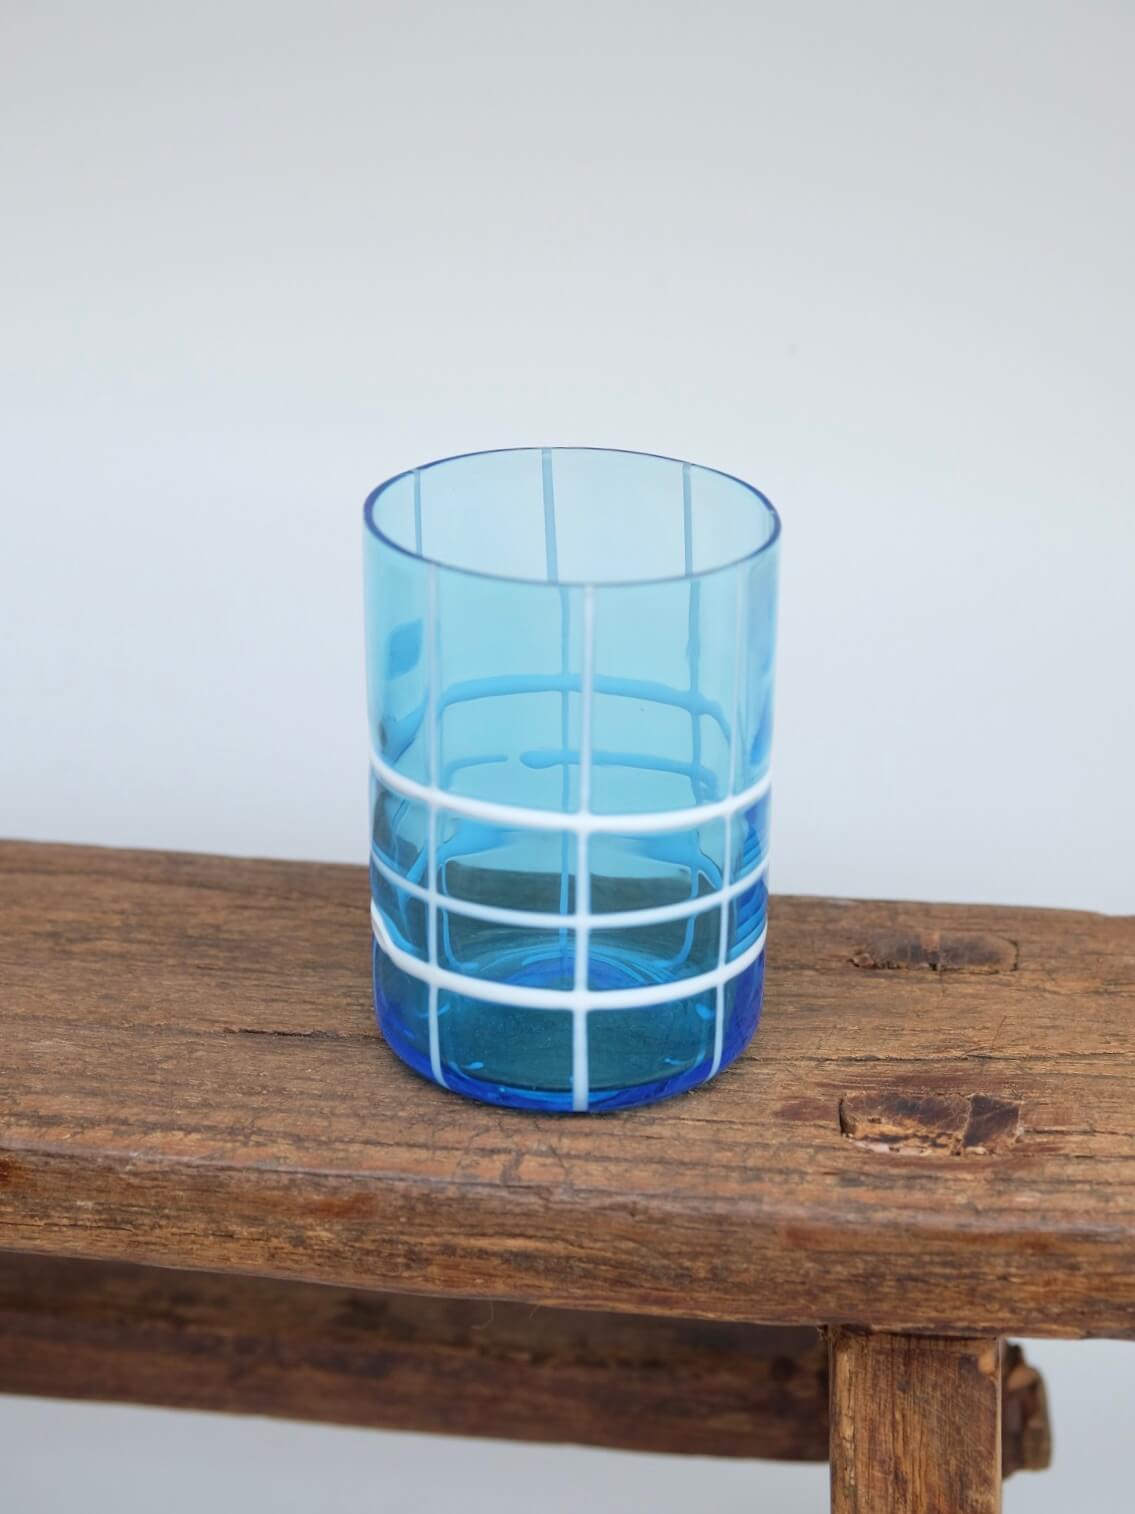 Checkered Glass in Light Blue and White